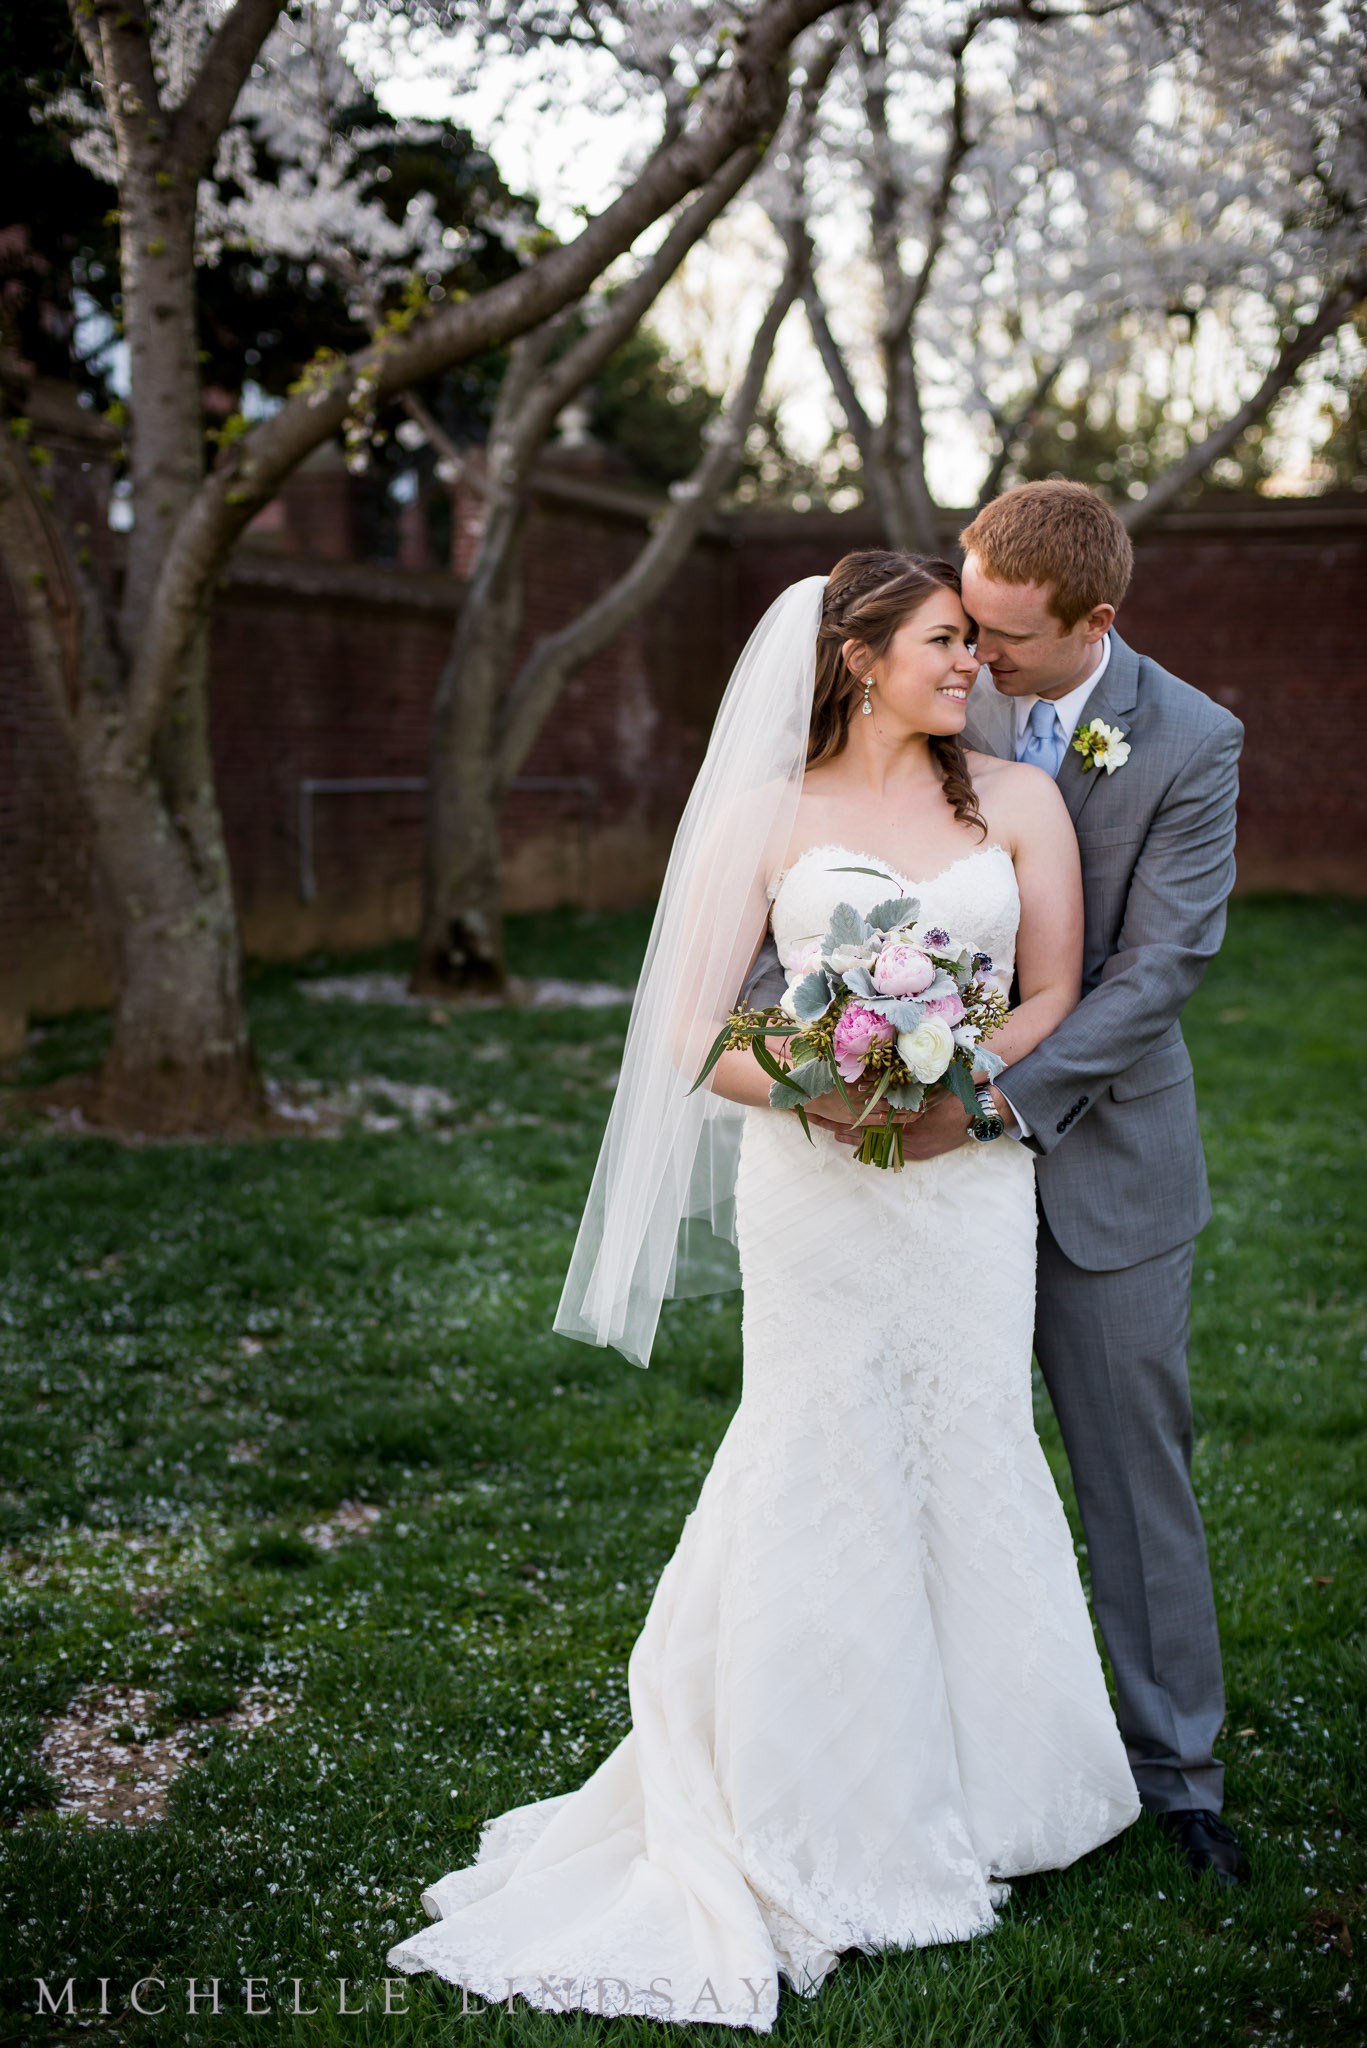 Our Wedding | Michelle Lindsay Photography